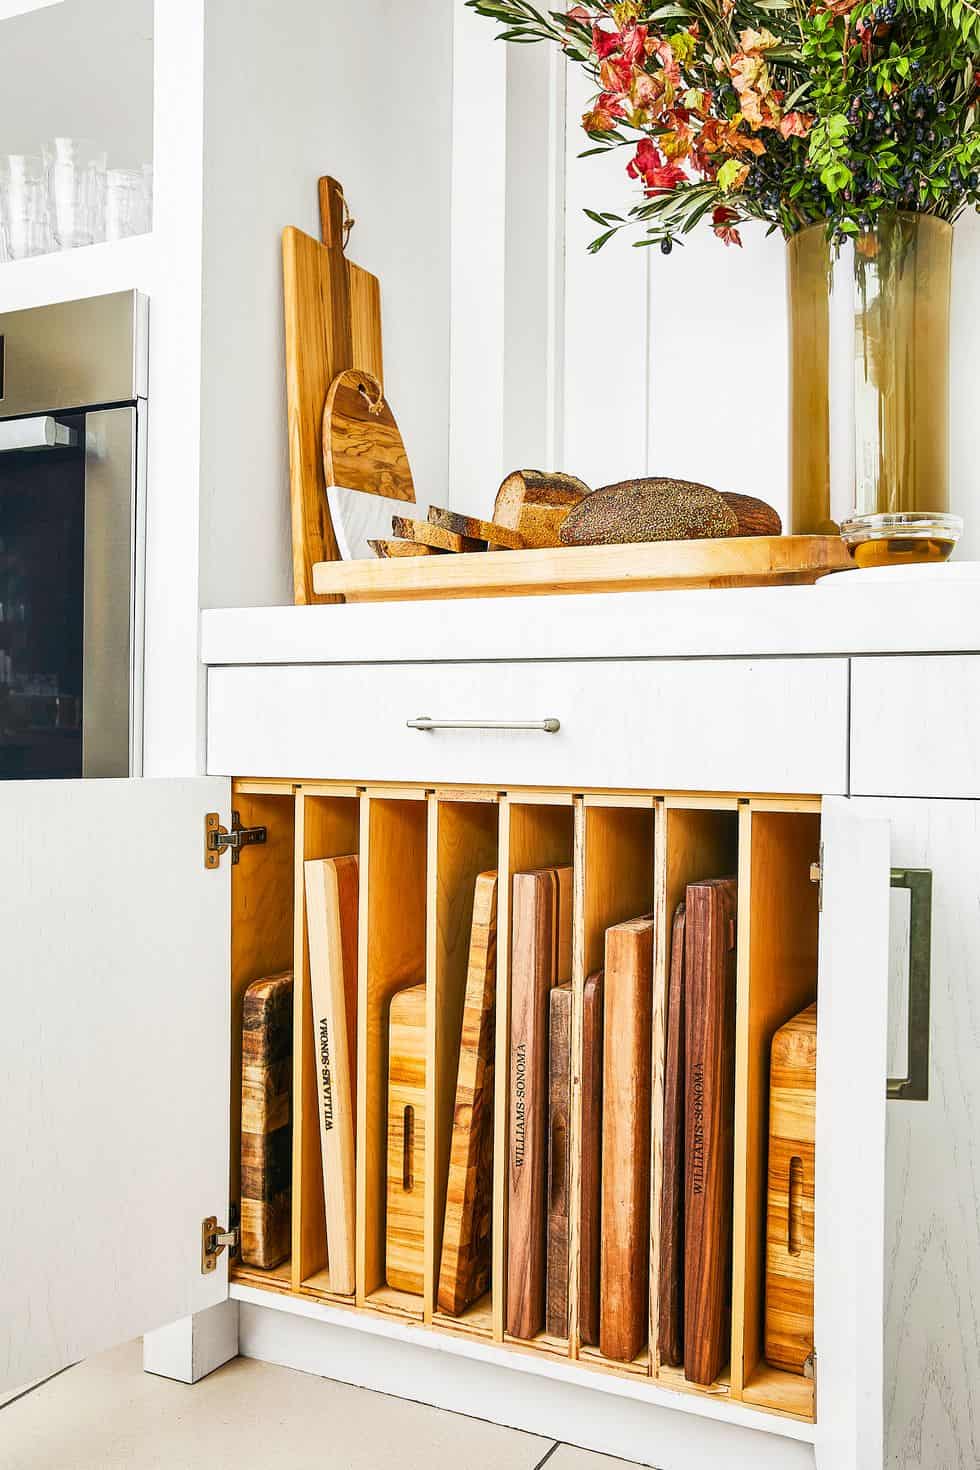 It seems like our kitchen can be quite like our closets: clutter and hard to manage